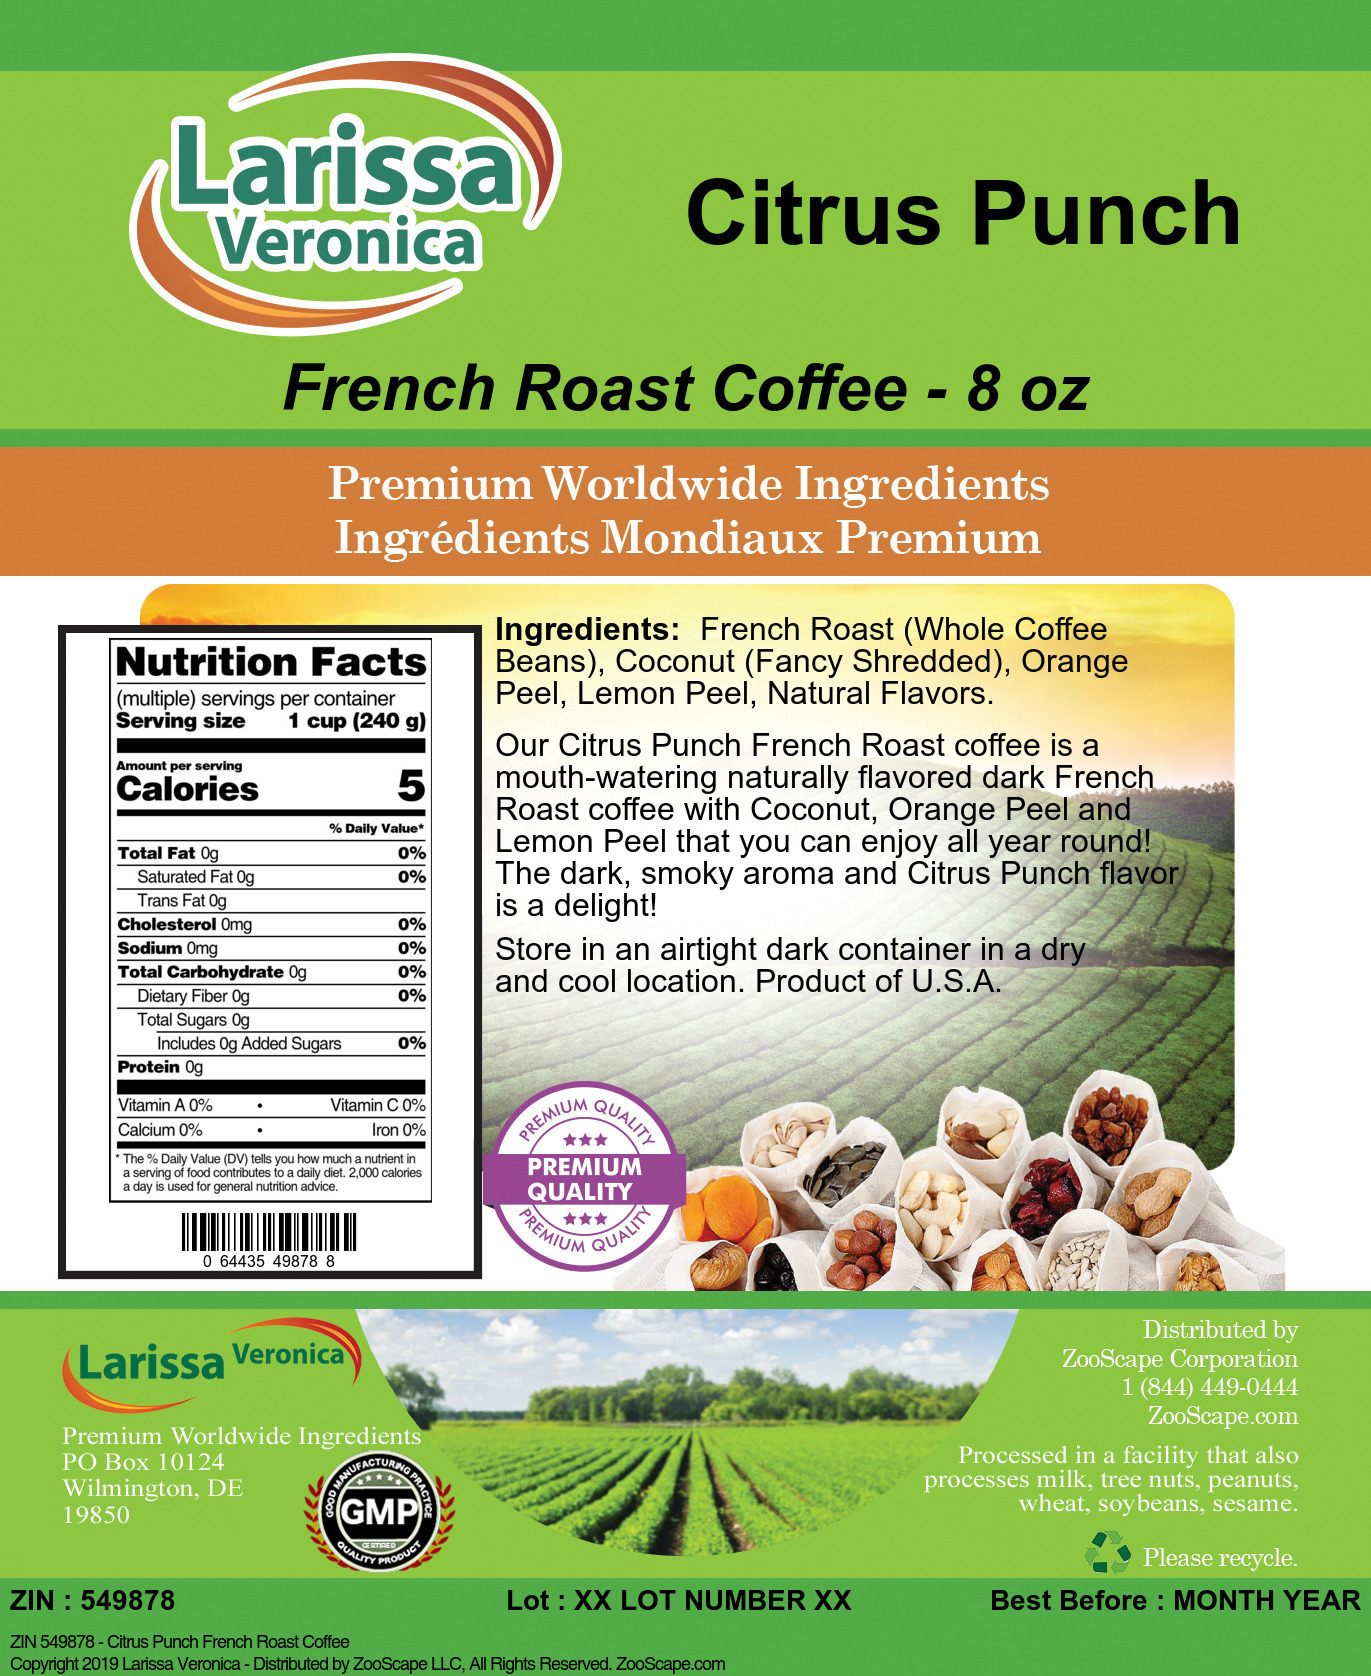 Citrus Punch French Roast Coffee - Label